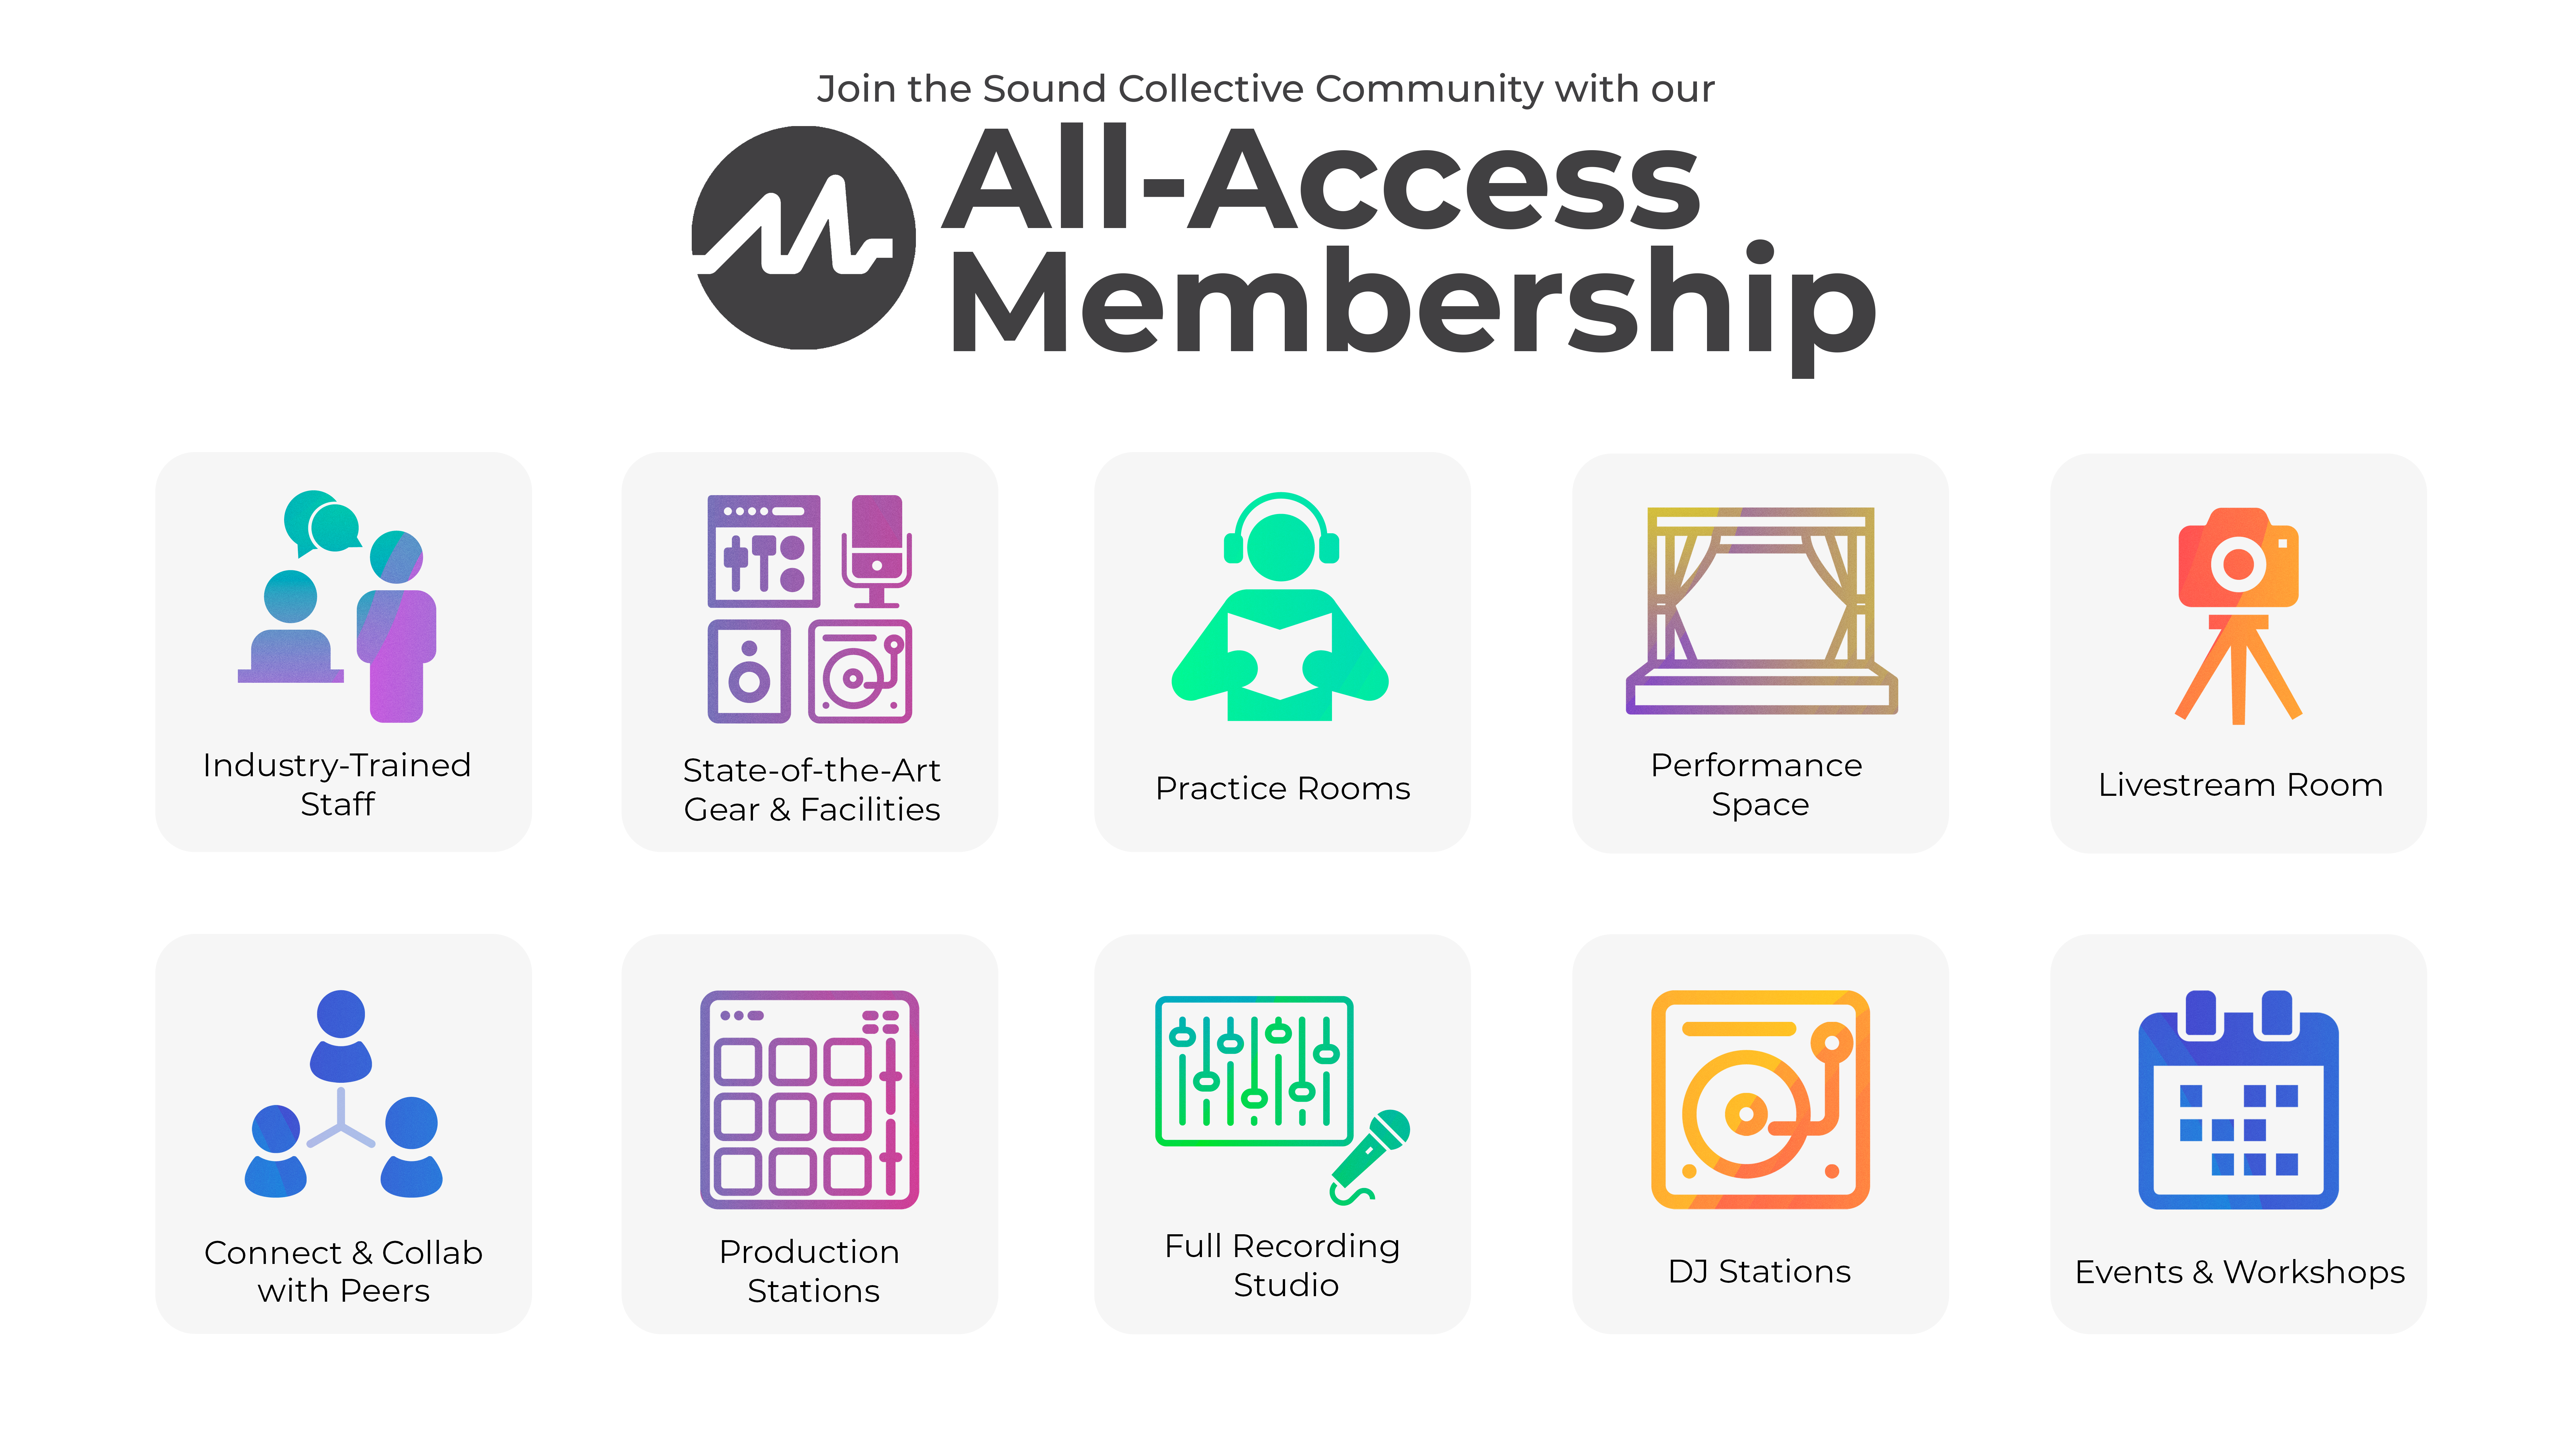 soundcollective,electronic music collective,sound collective,drummers collective,membership, All-Access Membership, SoundCollective